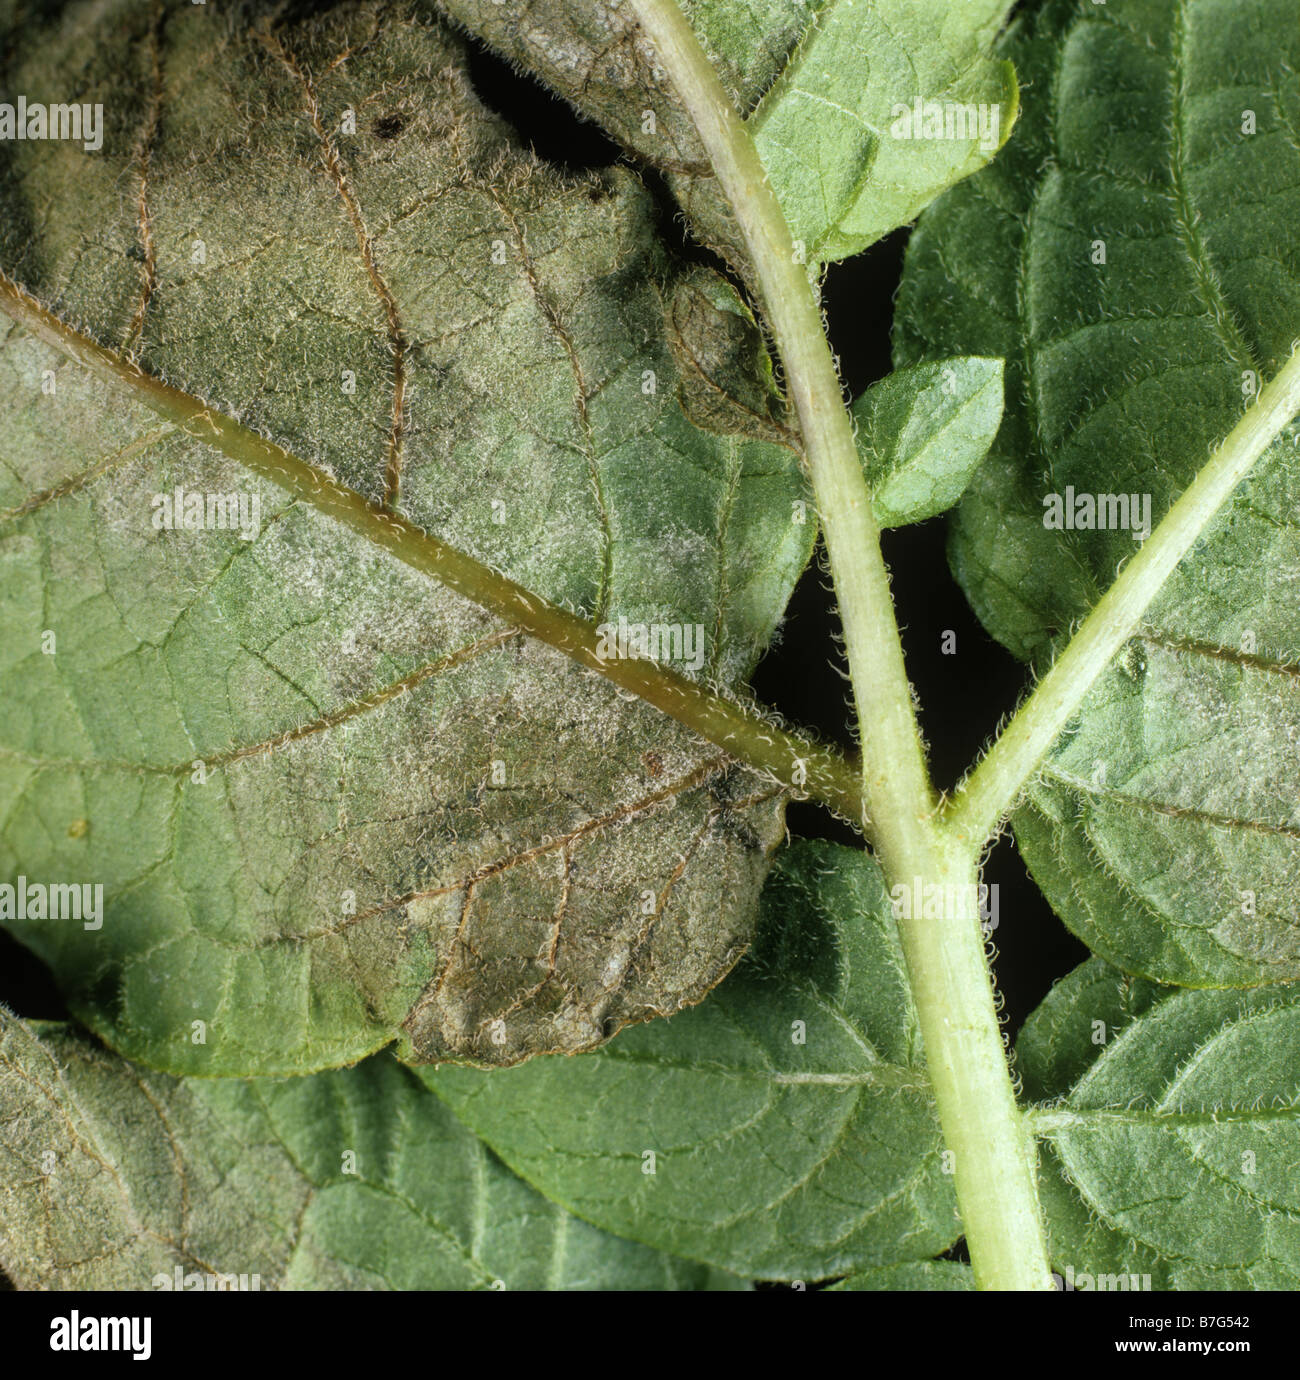 Potato late pblight Phytophthora infestans infection and mycelium on the leaf underside of Stock Photo